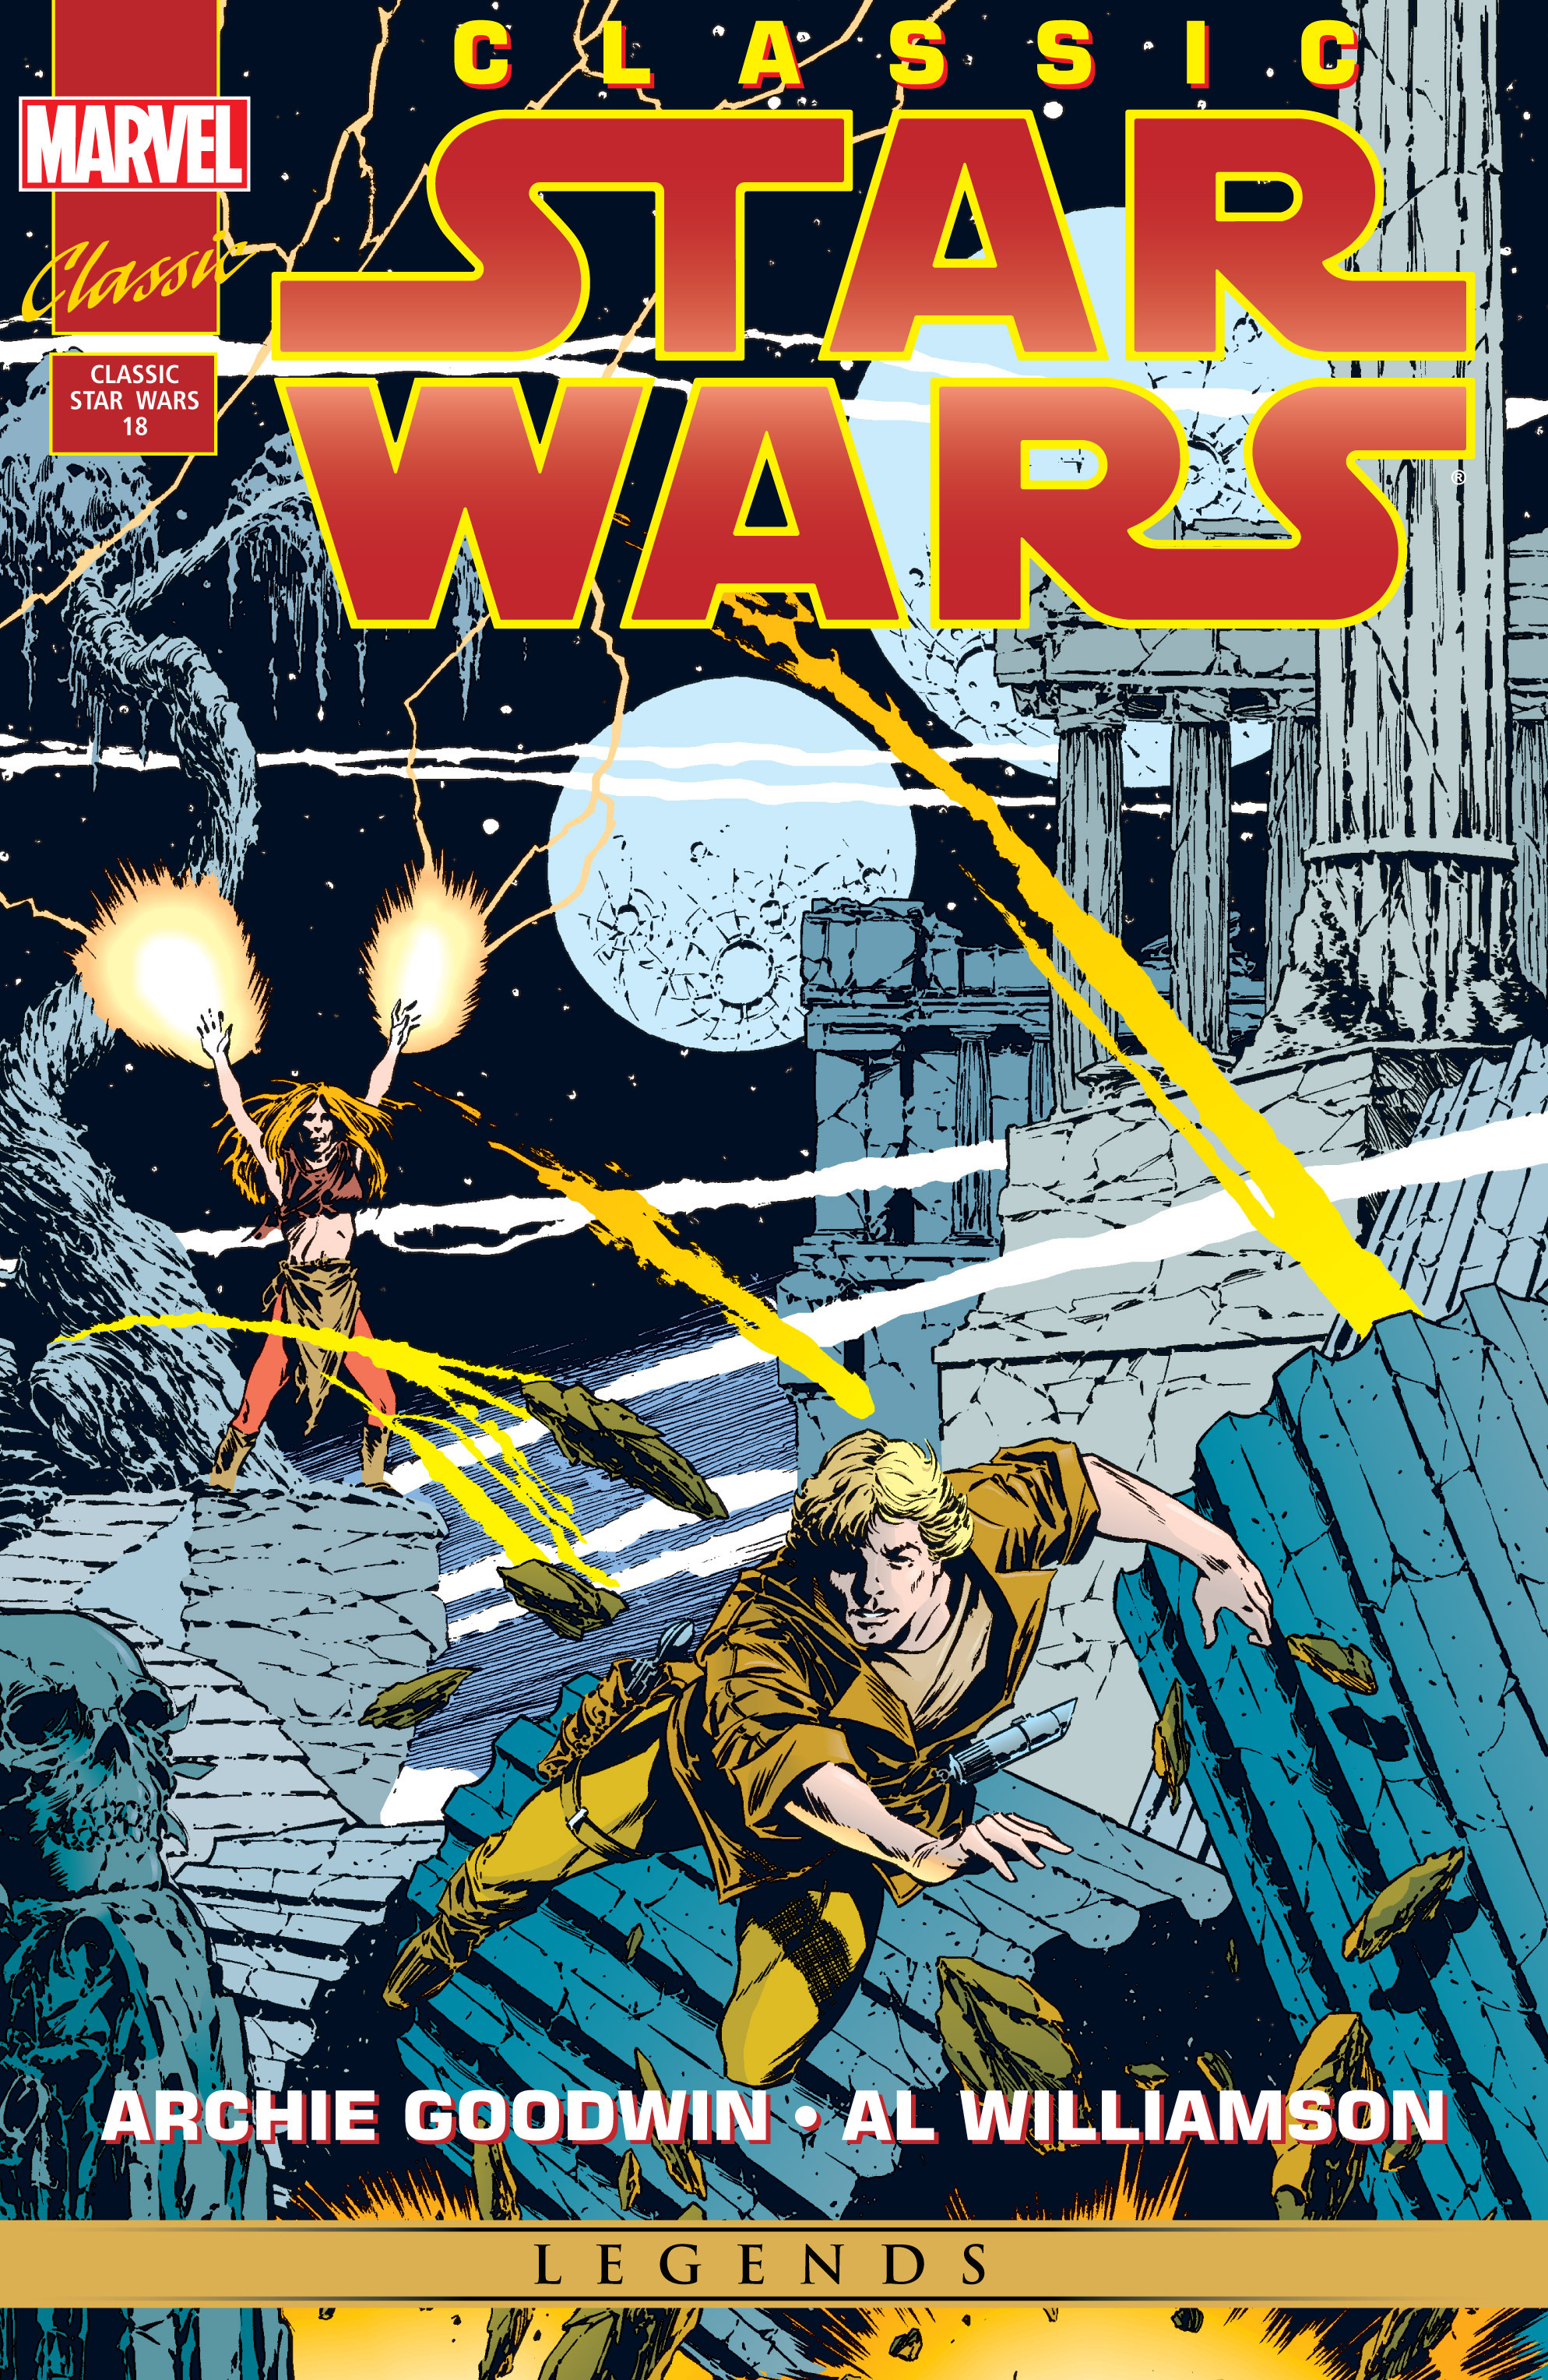 Read online Classic Star Wars comic -  Issue #18 - 1